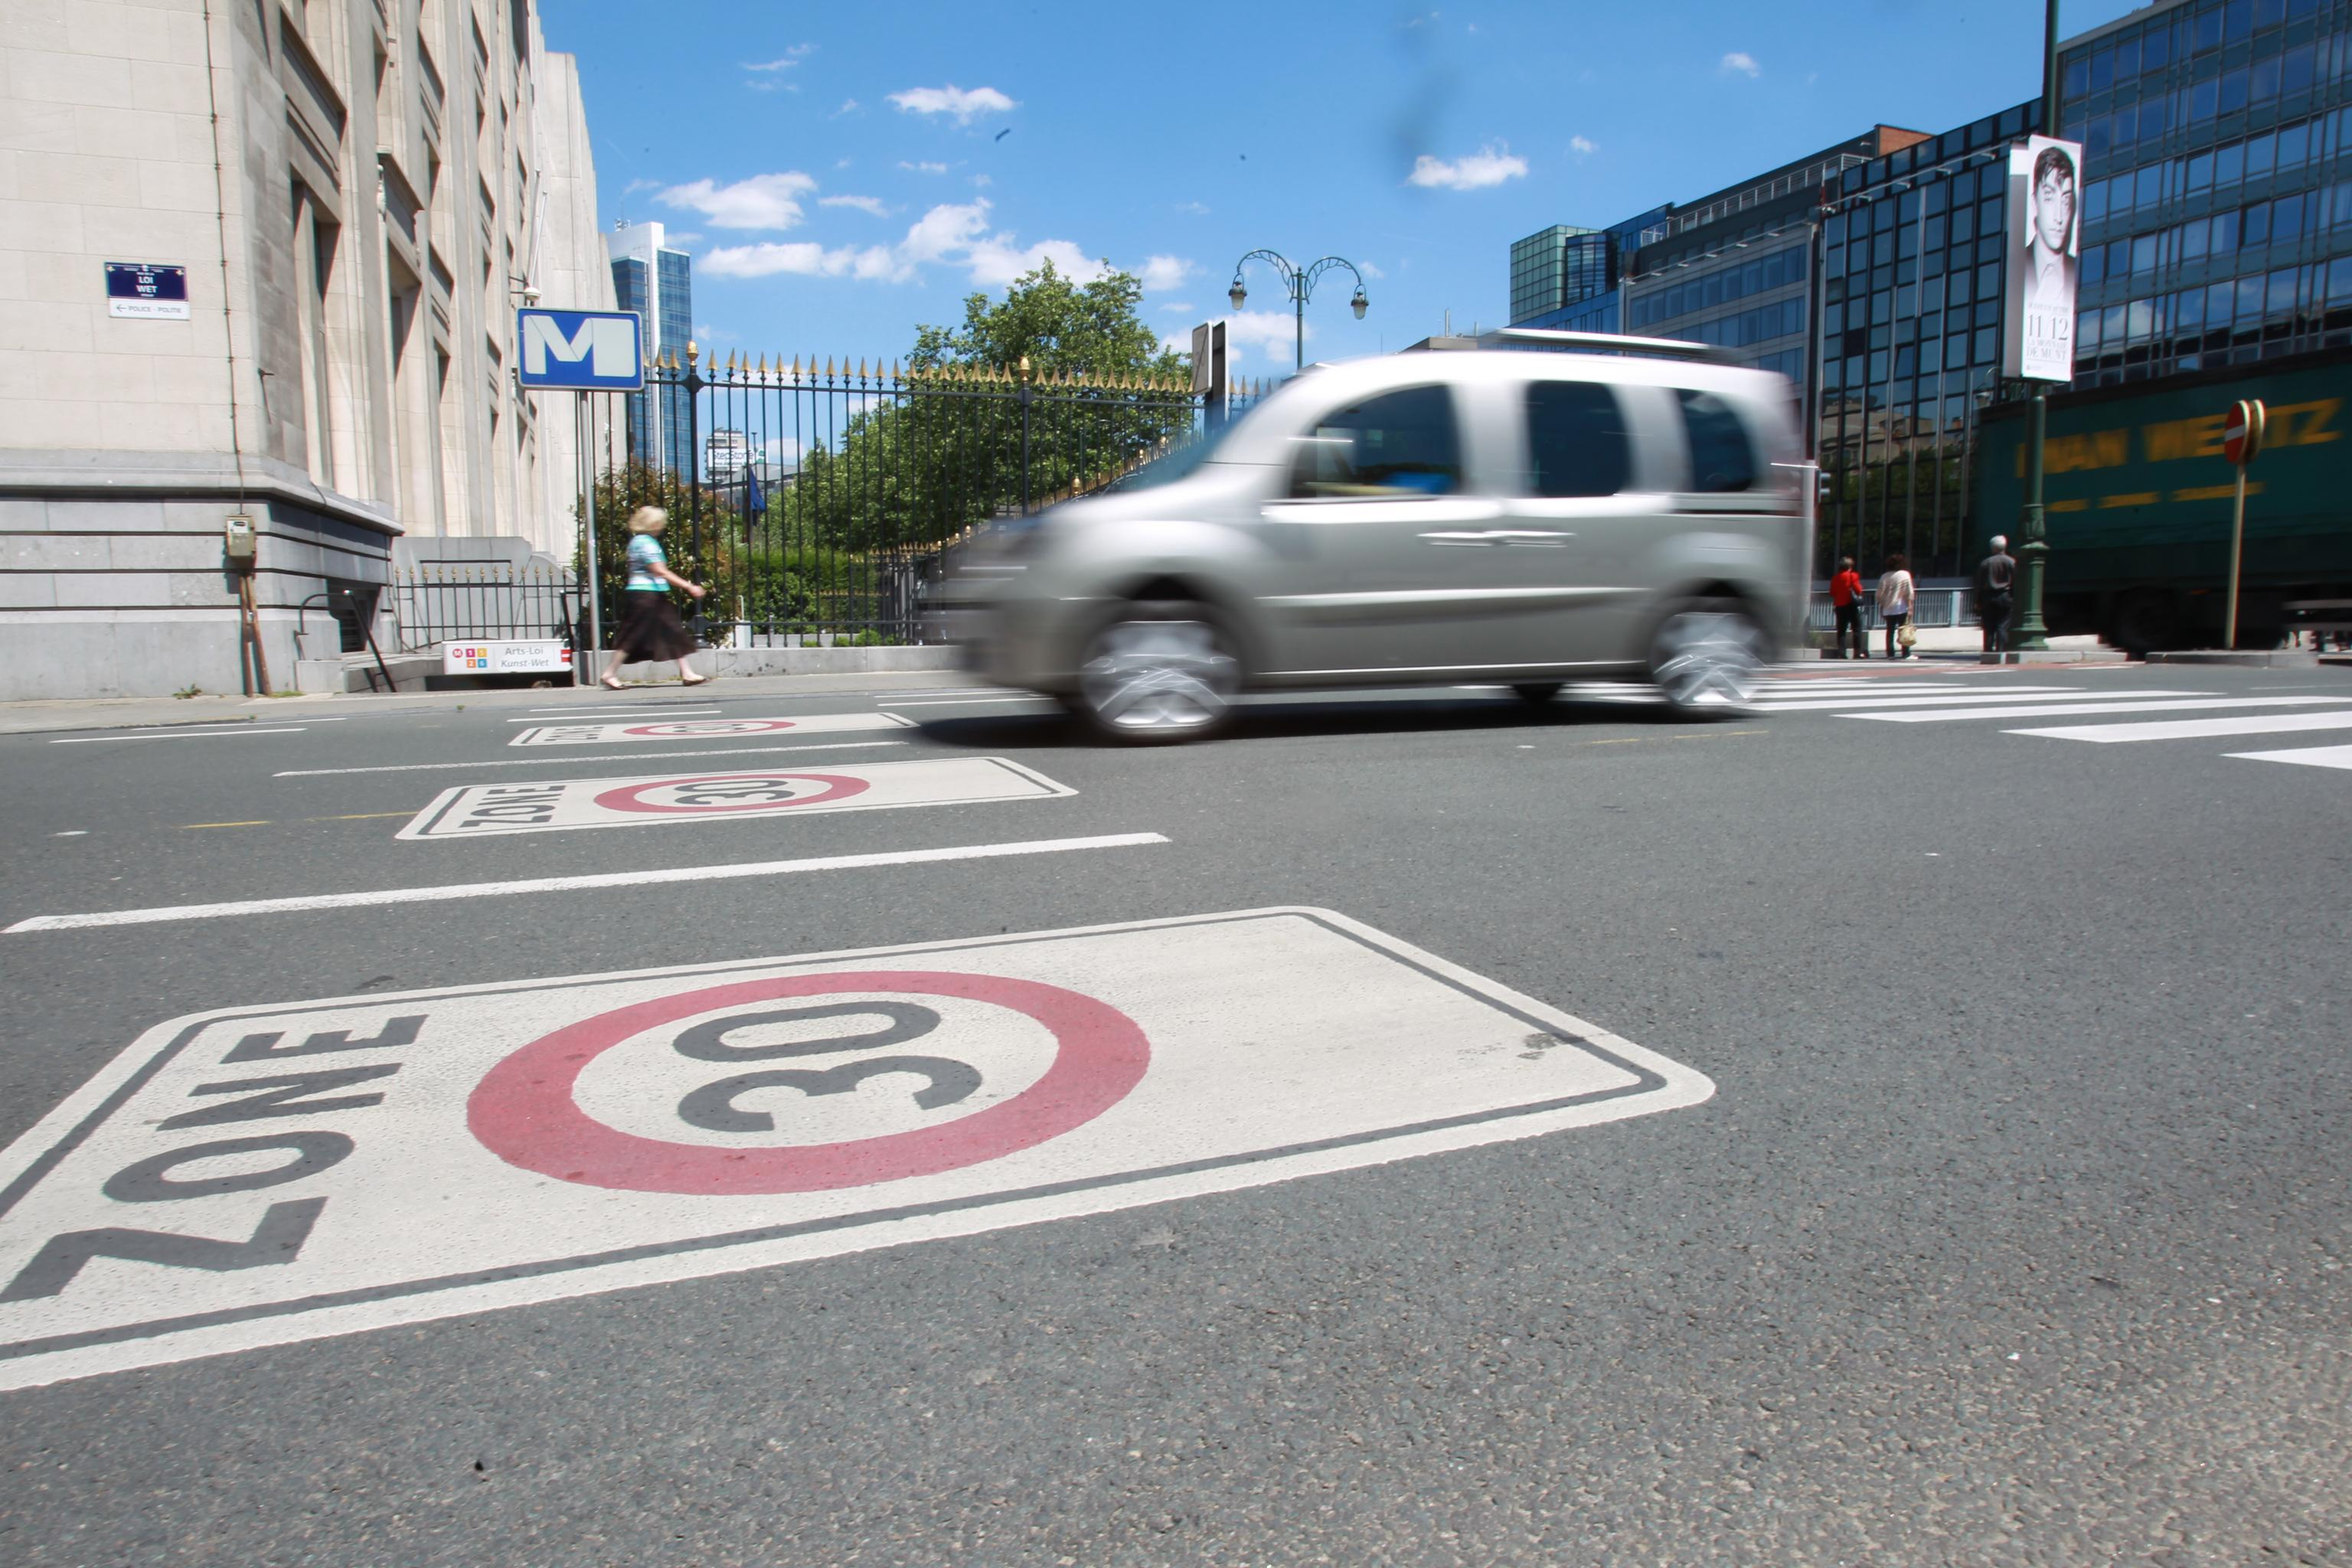 Zone 30 in Brussels: lower speeds and less serious accidents